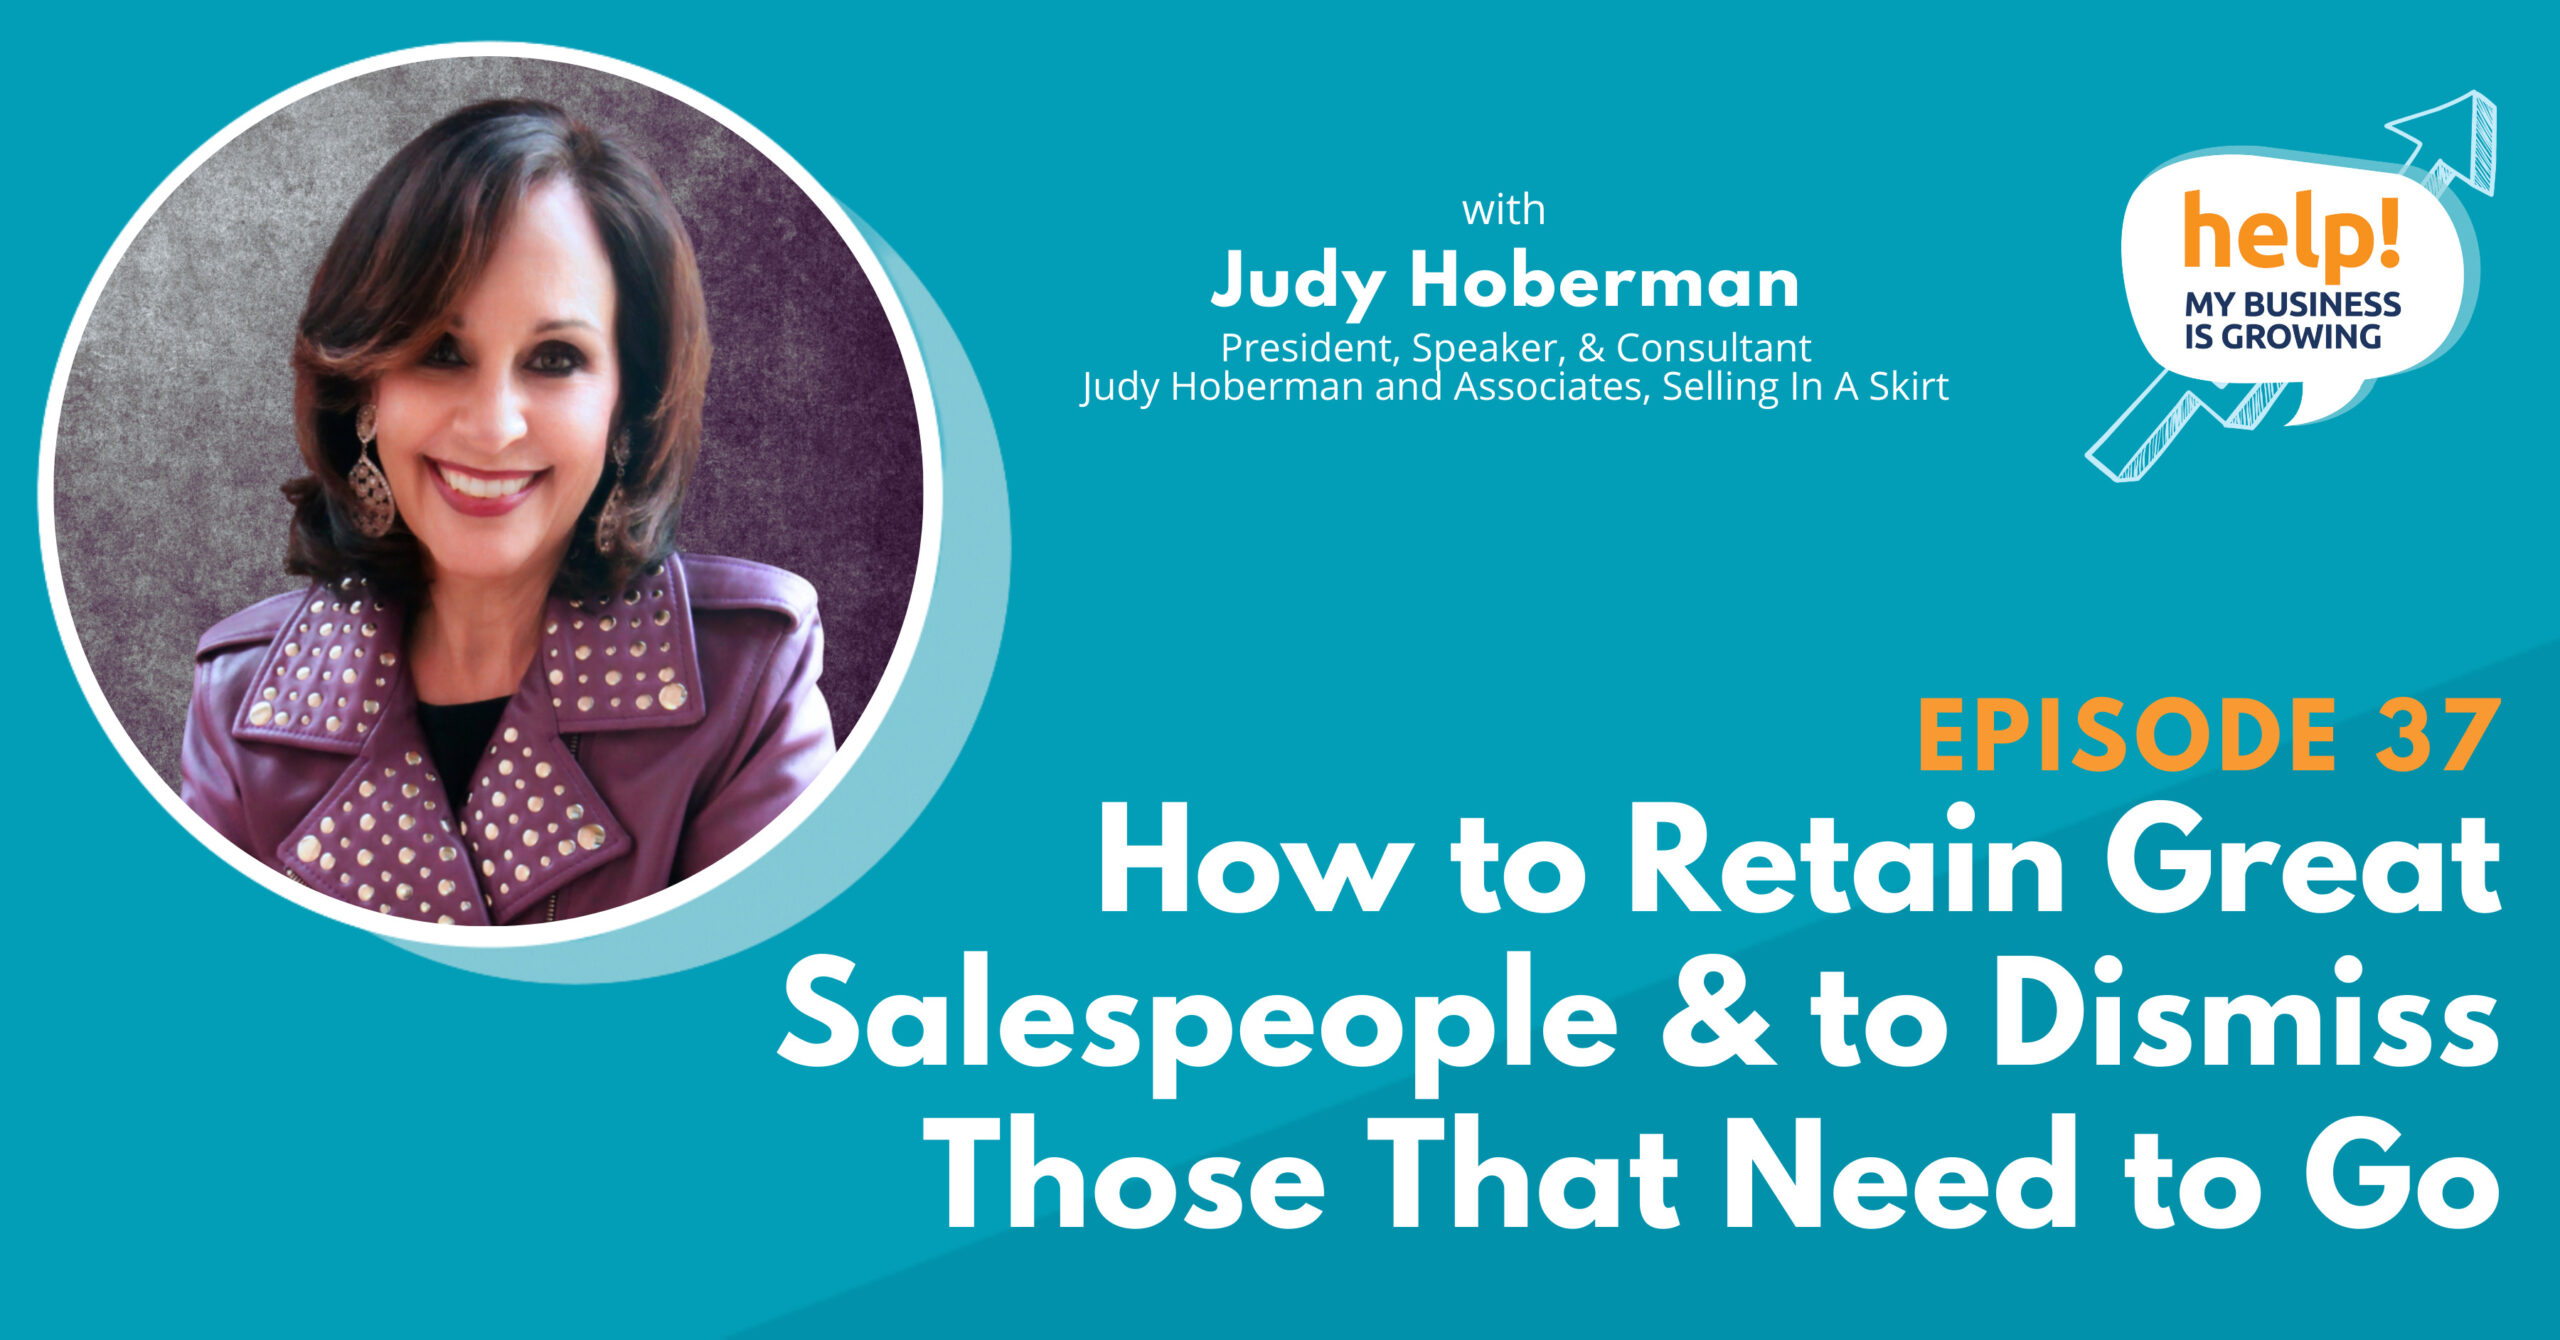 How to Retain Great Salespeople & to Dismiss Those That Need to Go